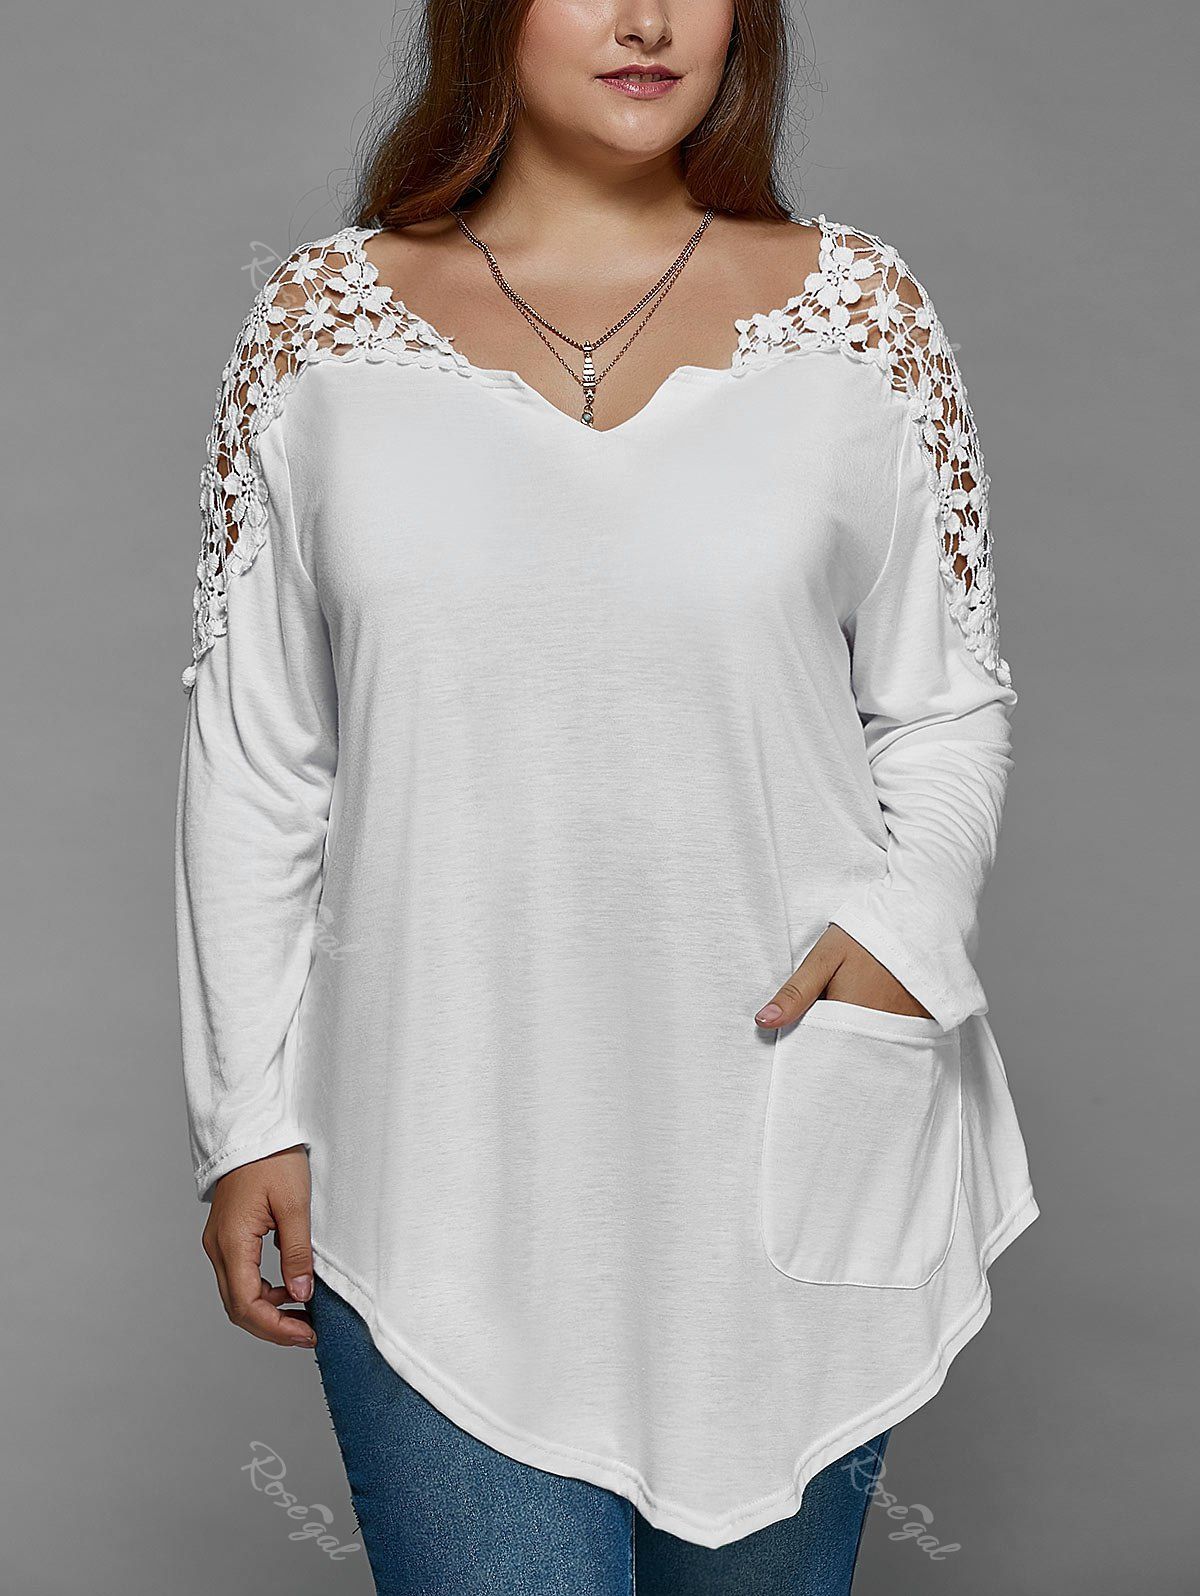 Discount Plus Size Lace Insert Long Sleeve Tunic T-Shirt  